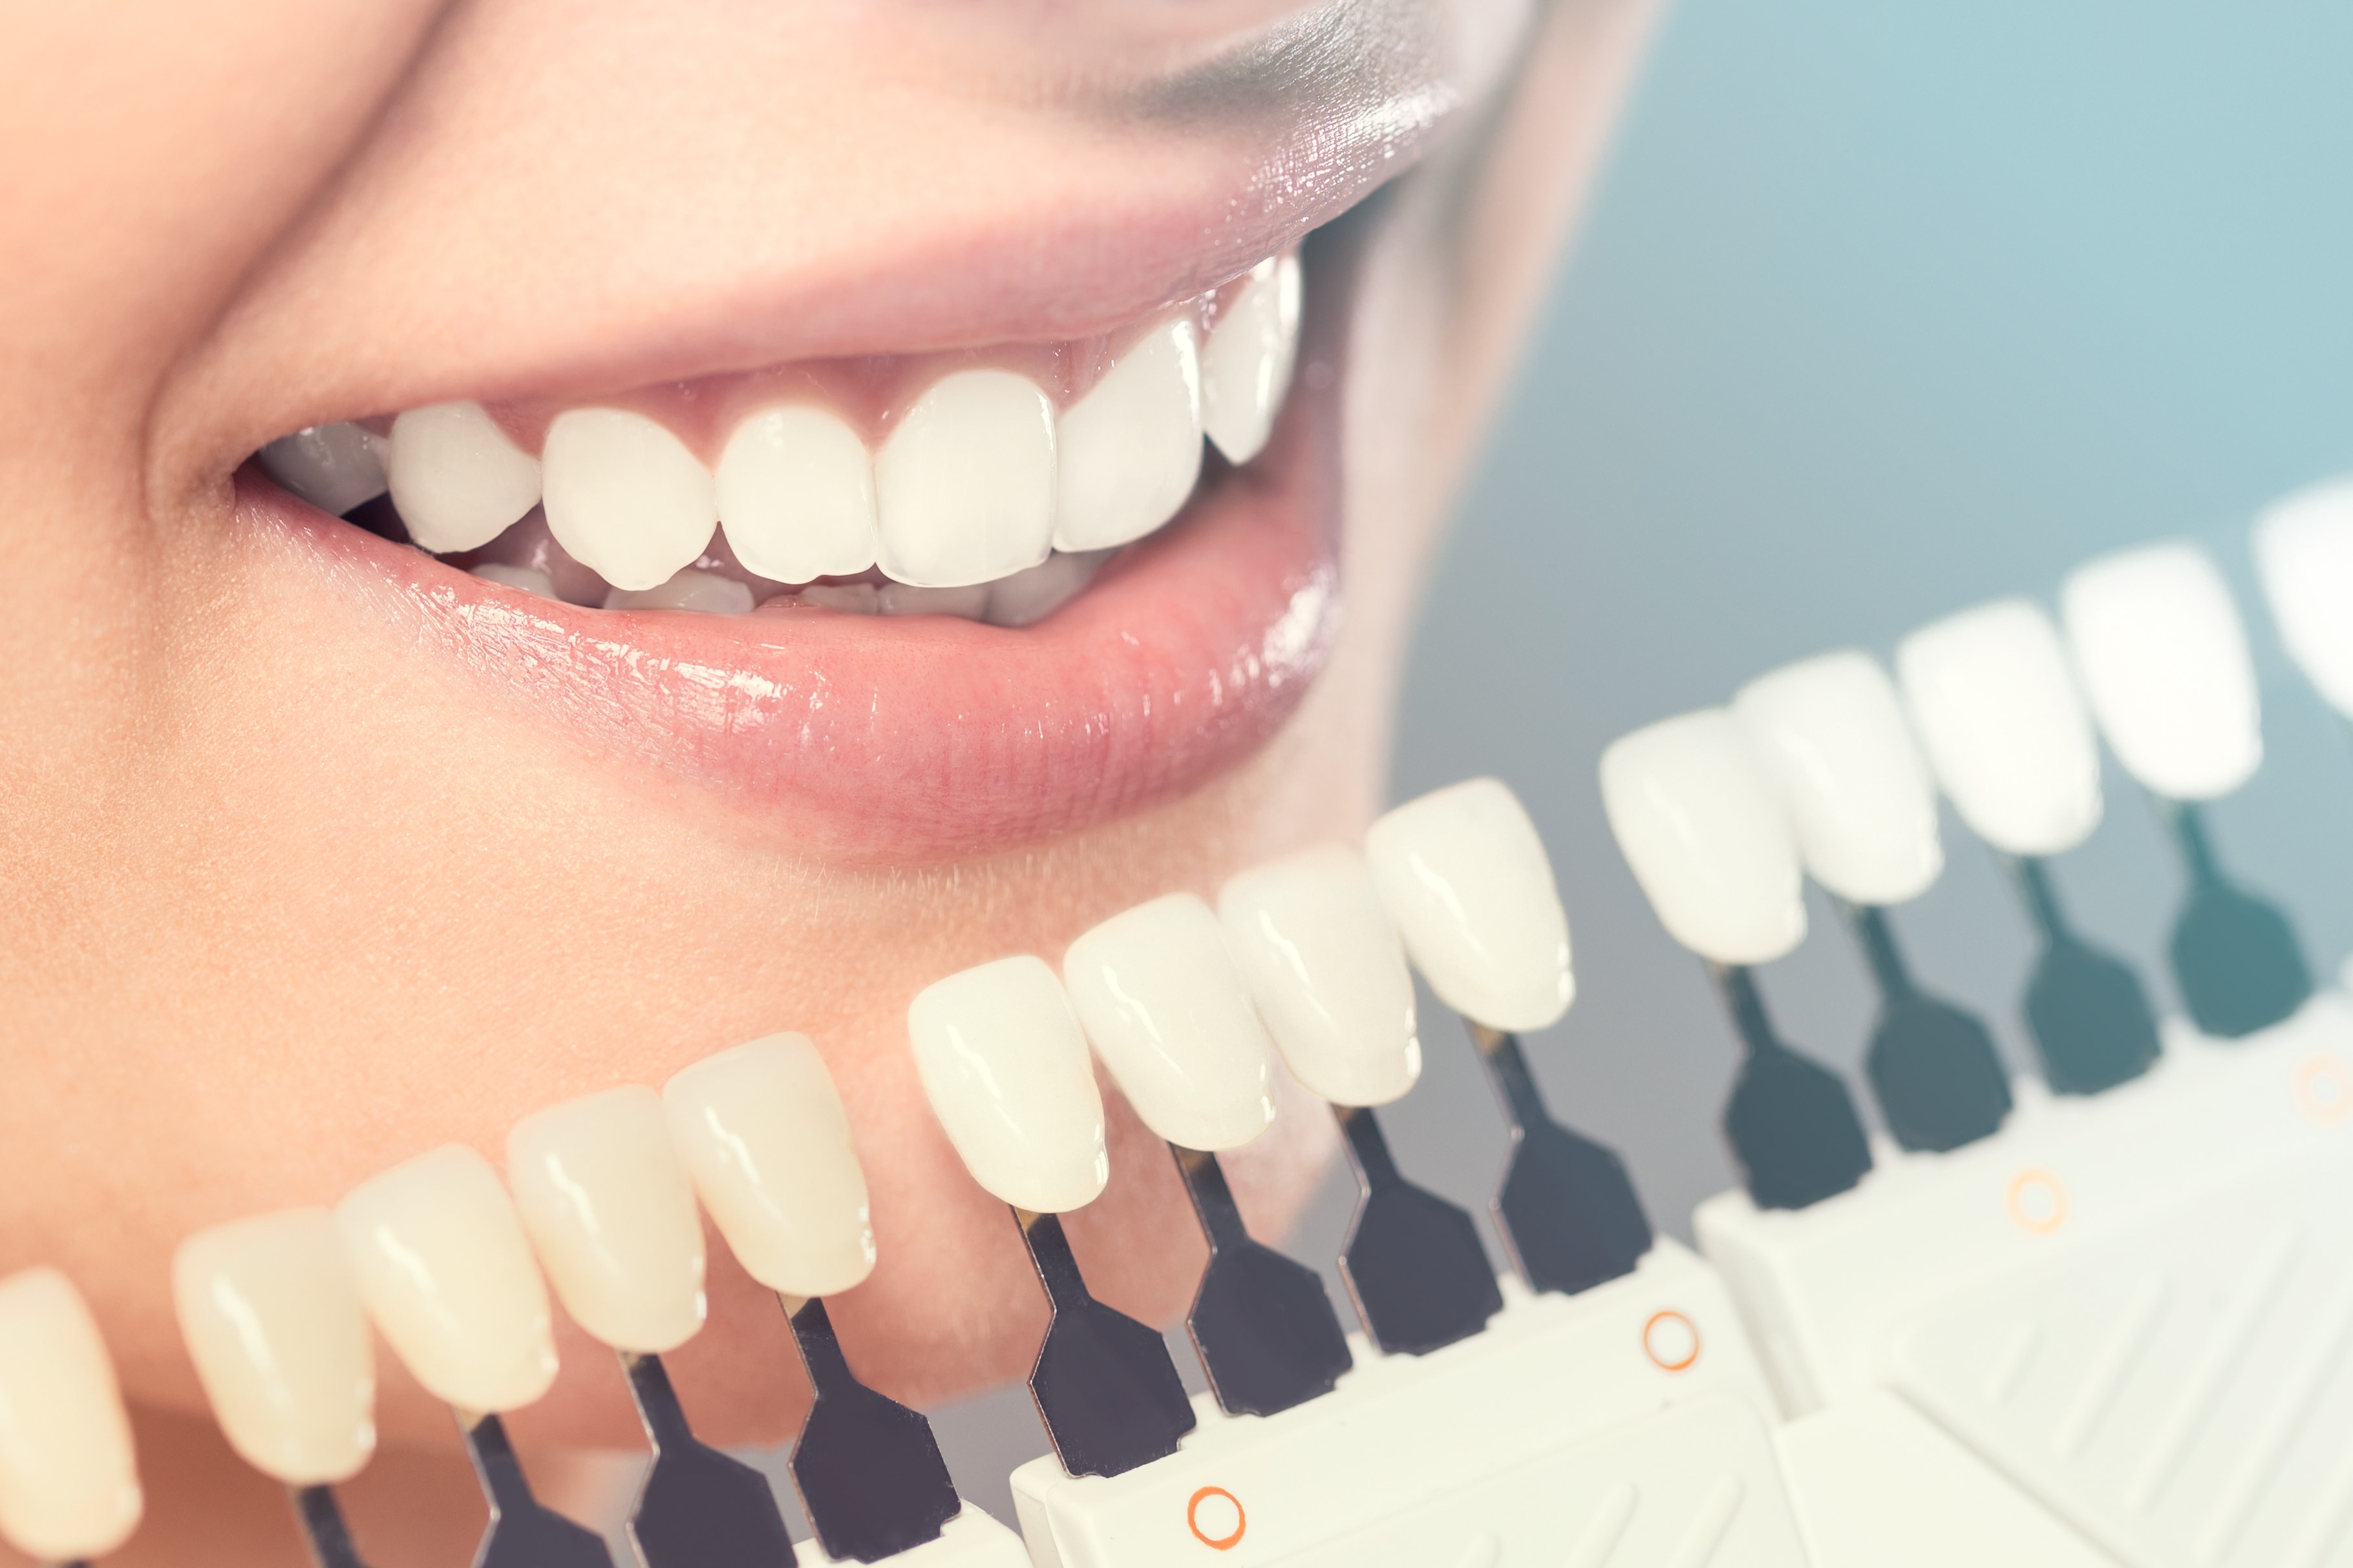 How To Look For The Best Cosmetic Dentist In Your Area?